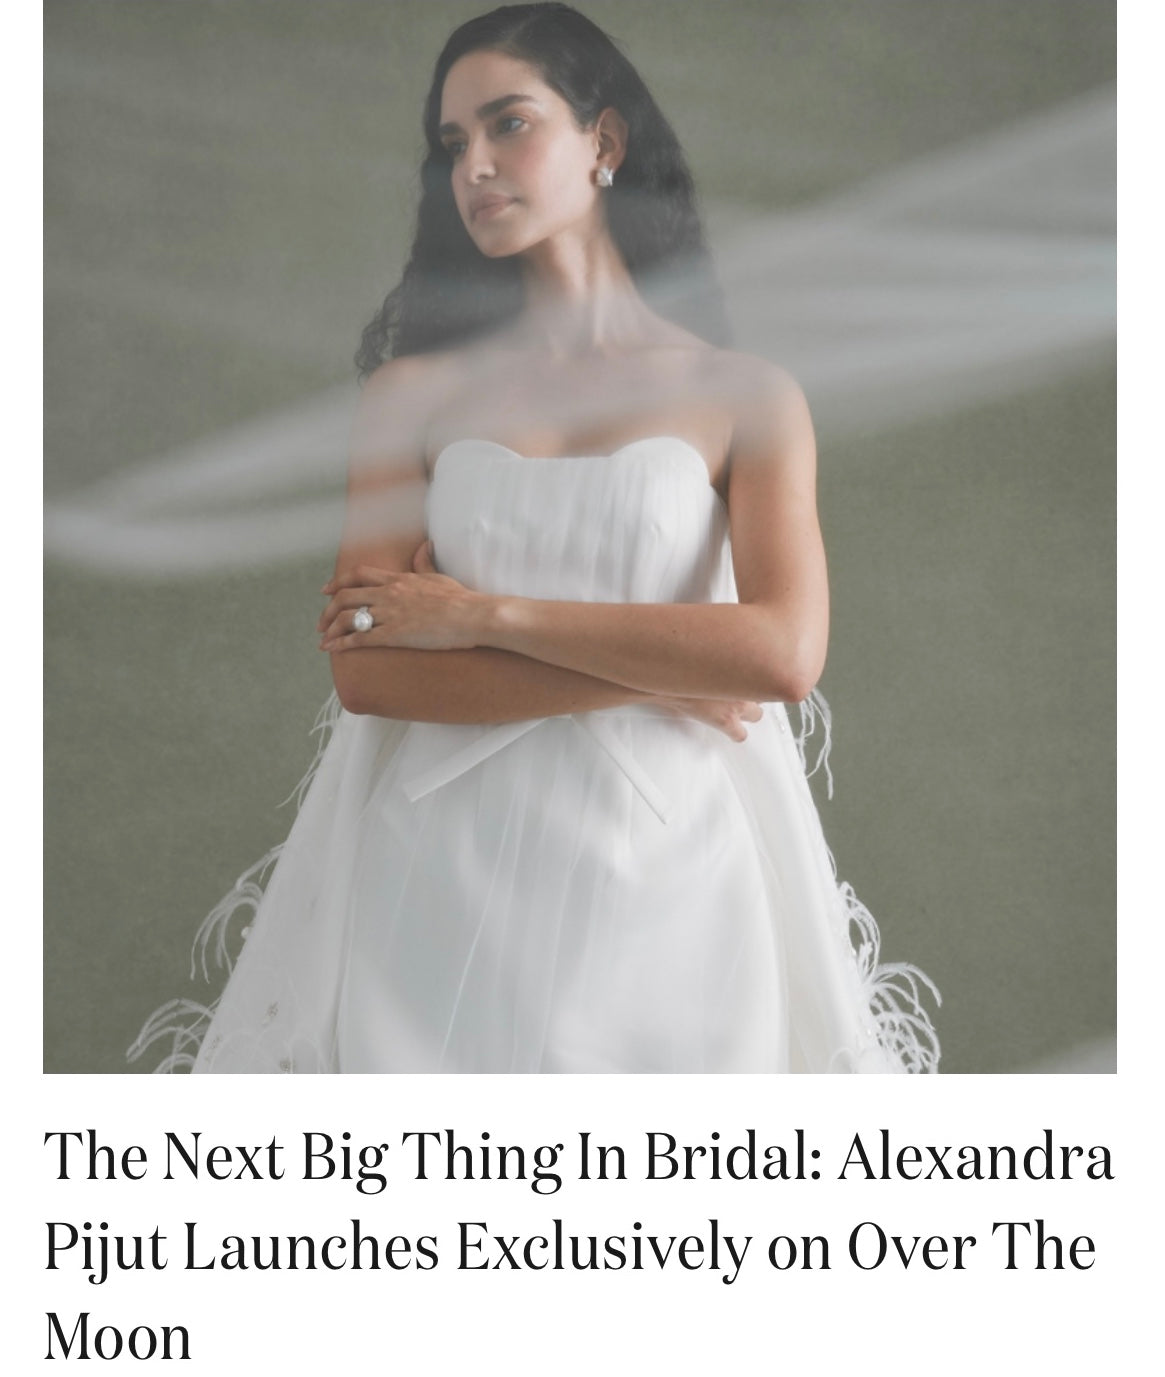 Alexandra Pijut named the next big thing in bridal by Over The Moon